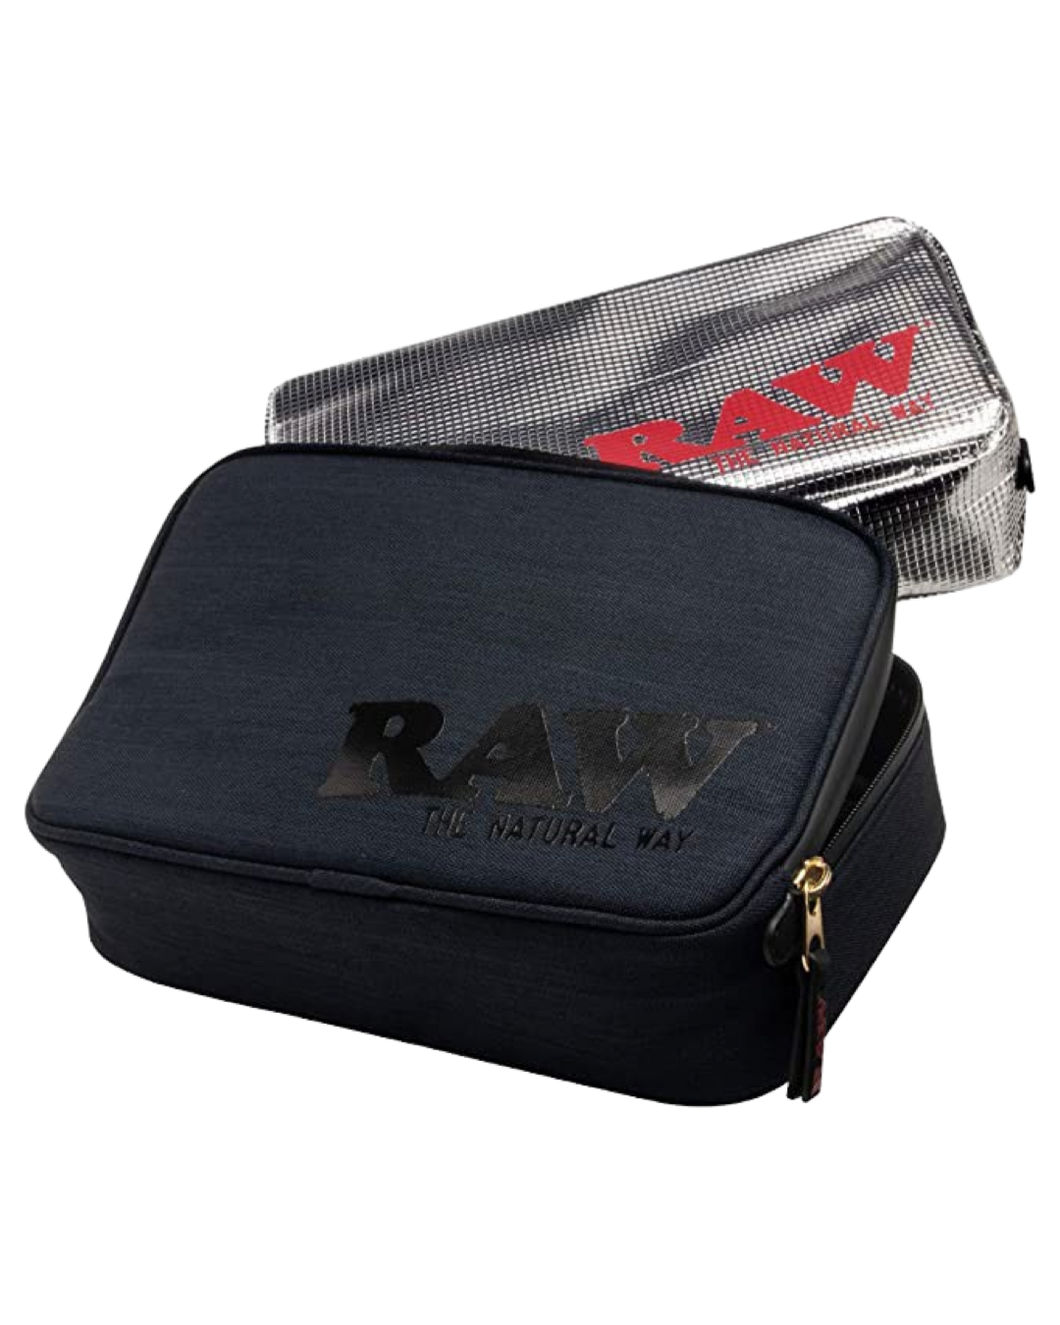 A Quarter Pounder Sized RAW Smell Proof Smokers Pouch v2.